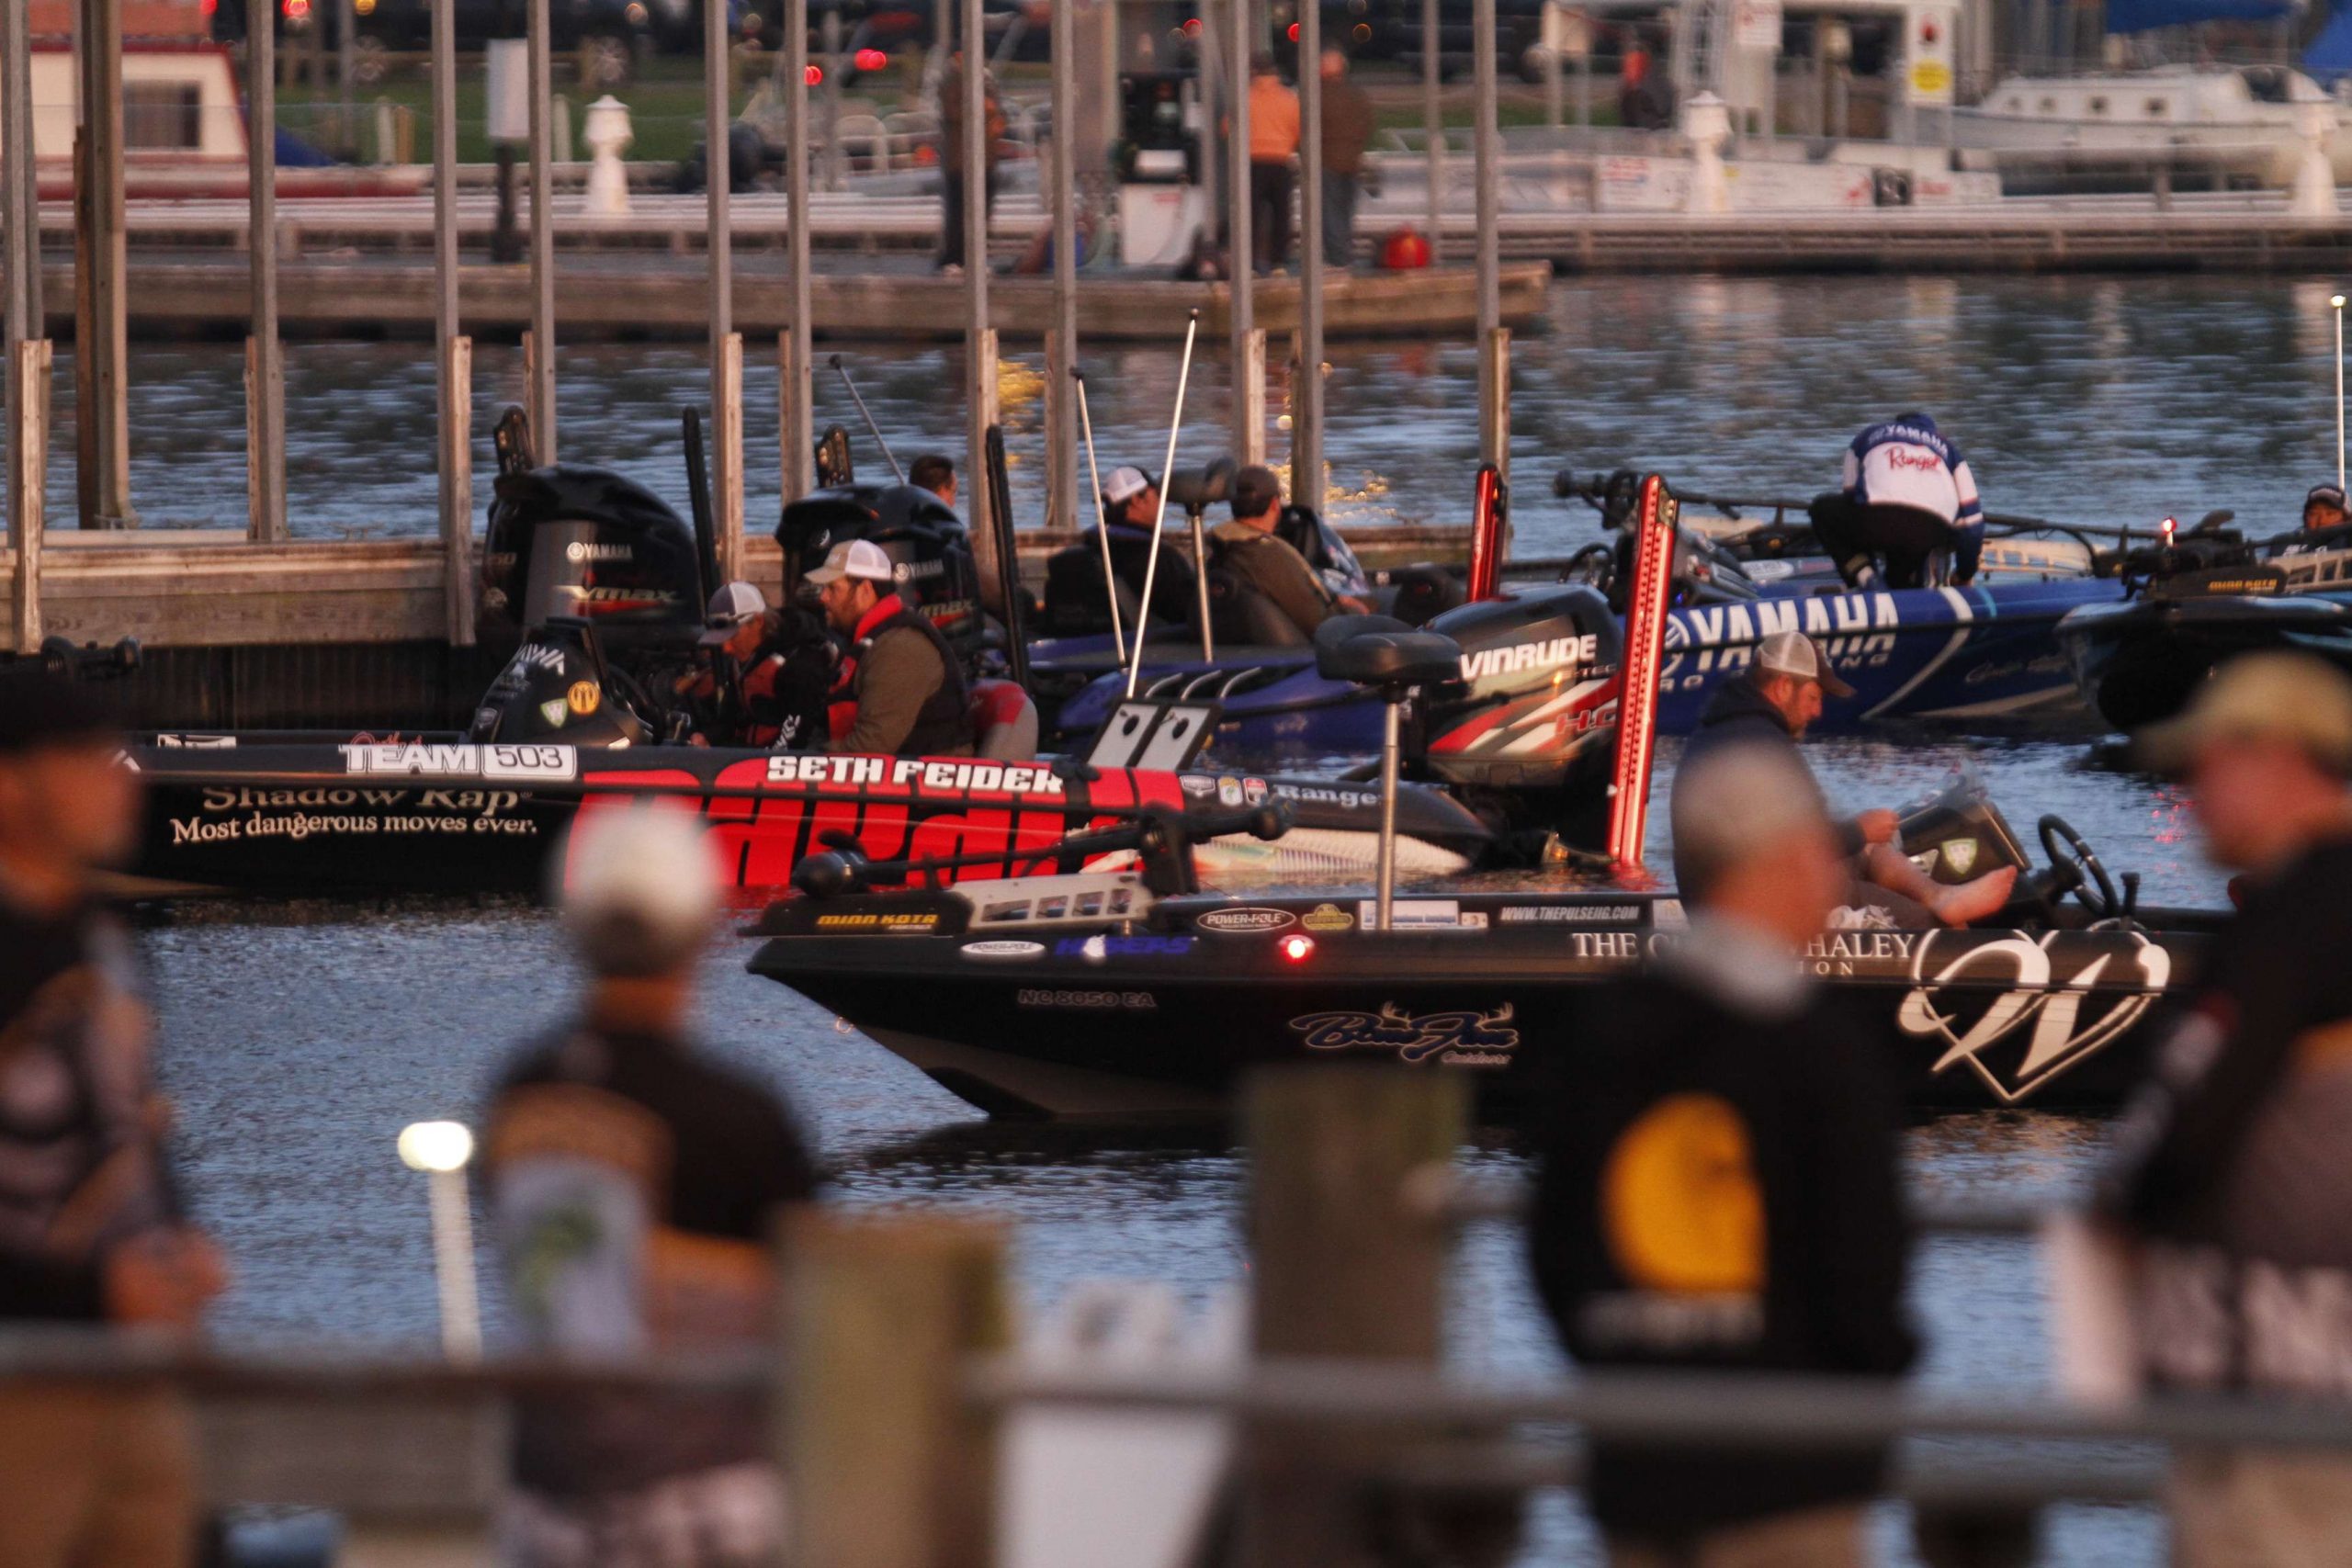 Bass fans enjoy an up-close look at the pros and their rigs.